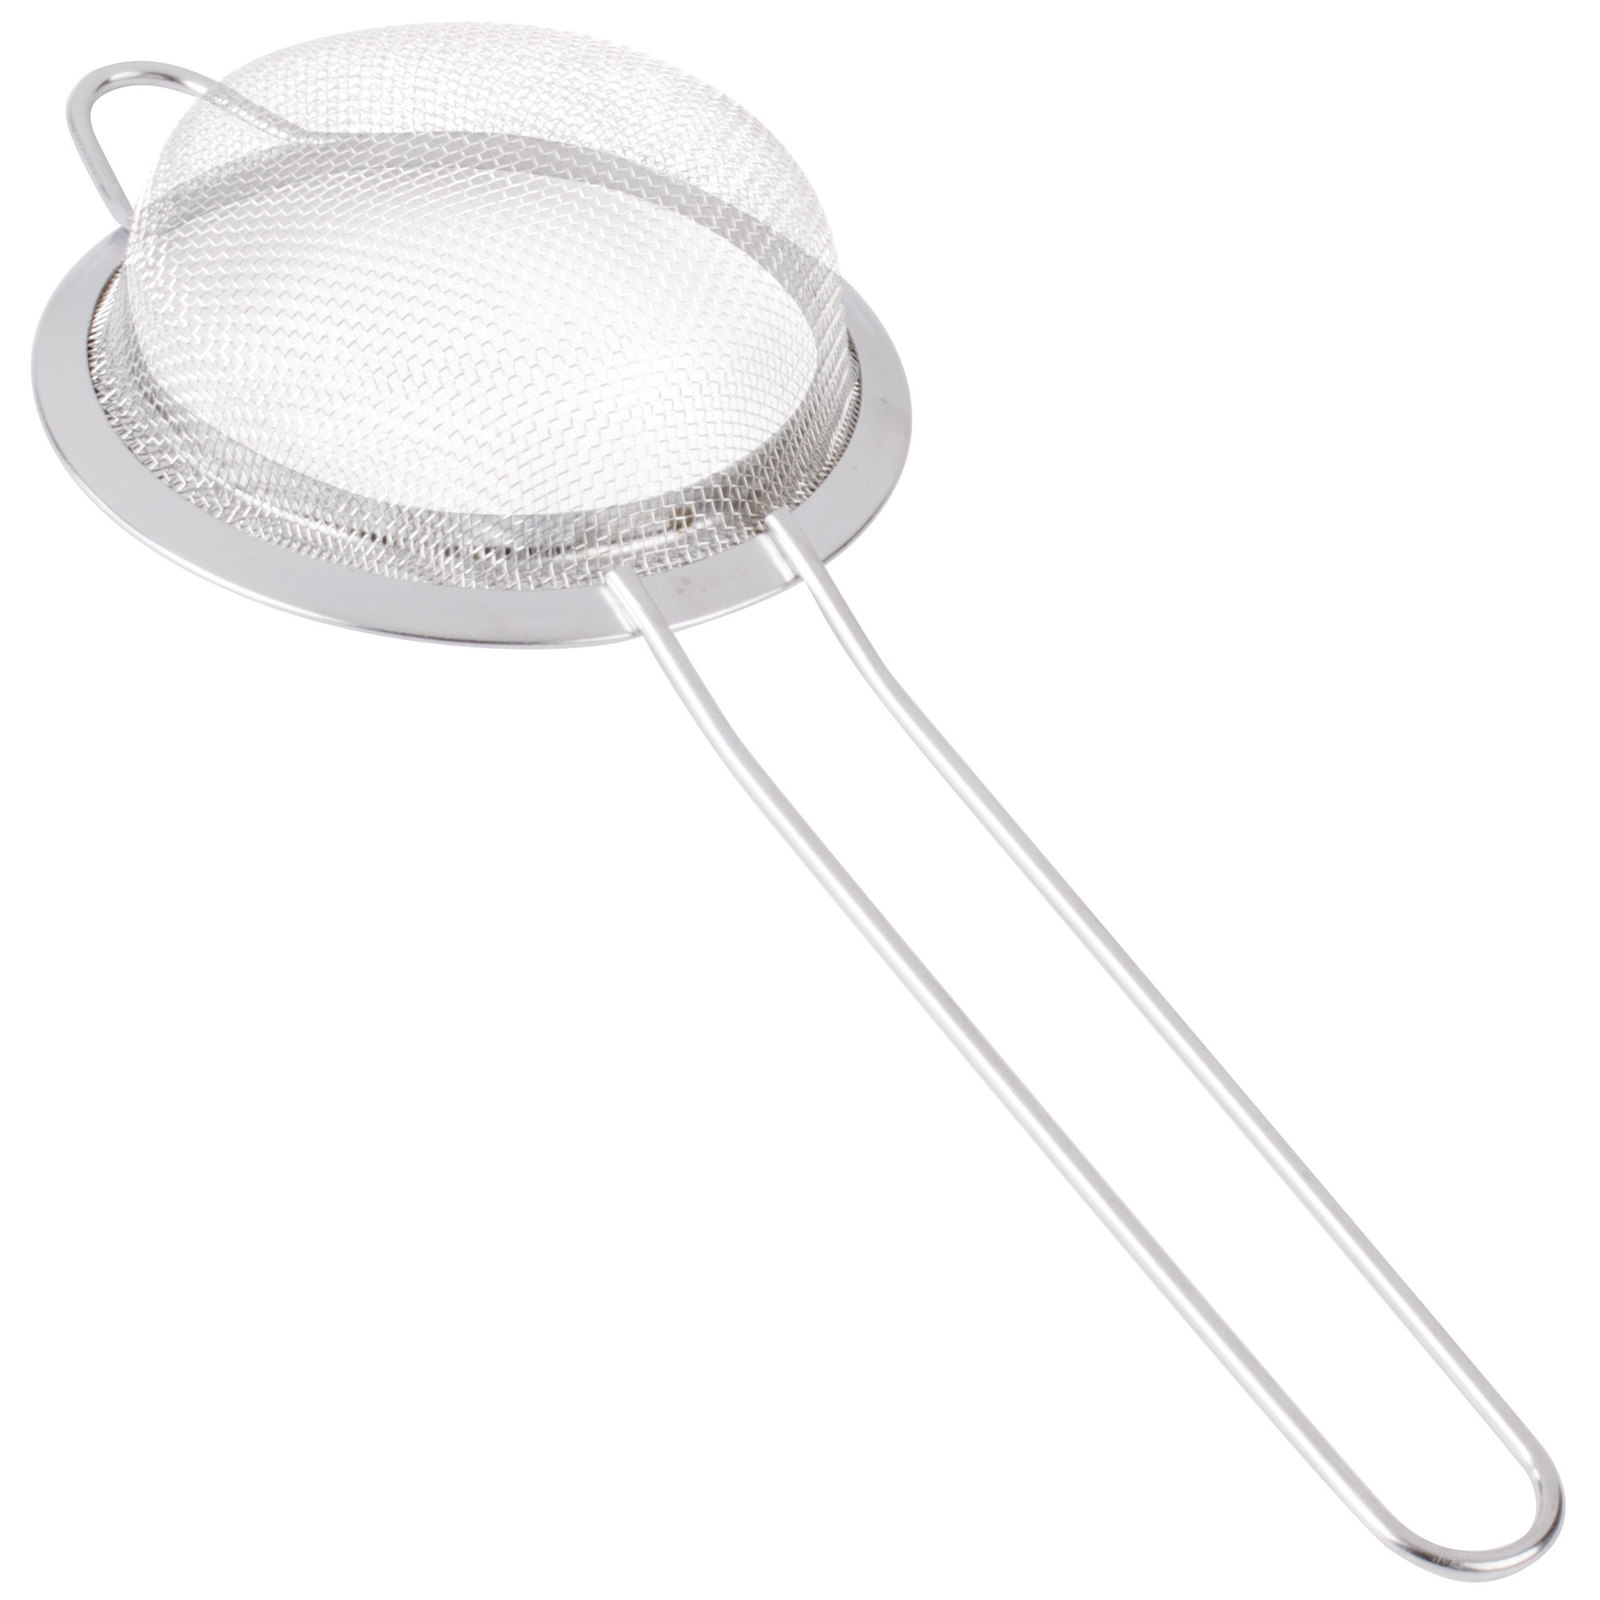 Primary image for 8'' x 3'' Stainless Steel Fine Mesh Strainer